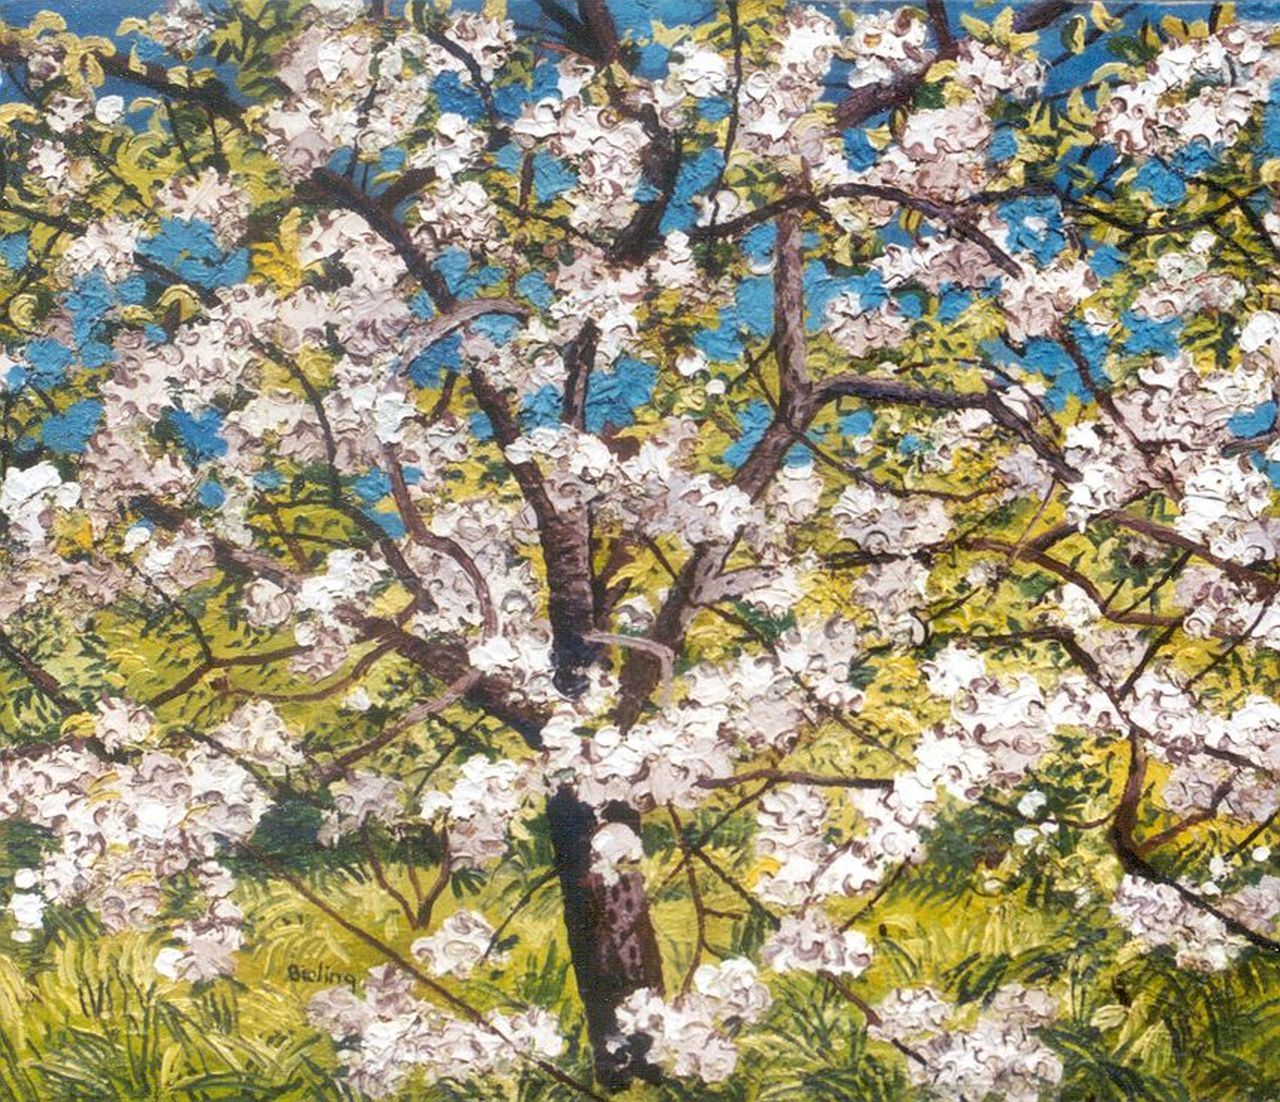 Bieling H.F.  | Hermann Friederich 'Herman' Bieling, A blossoming tree, Öl auf Leinwand 46,5 x 54,9 cm, signed l.l. and on a label on the reverse